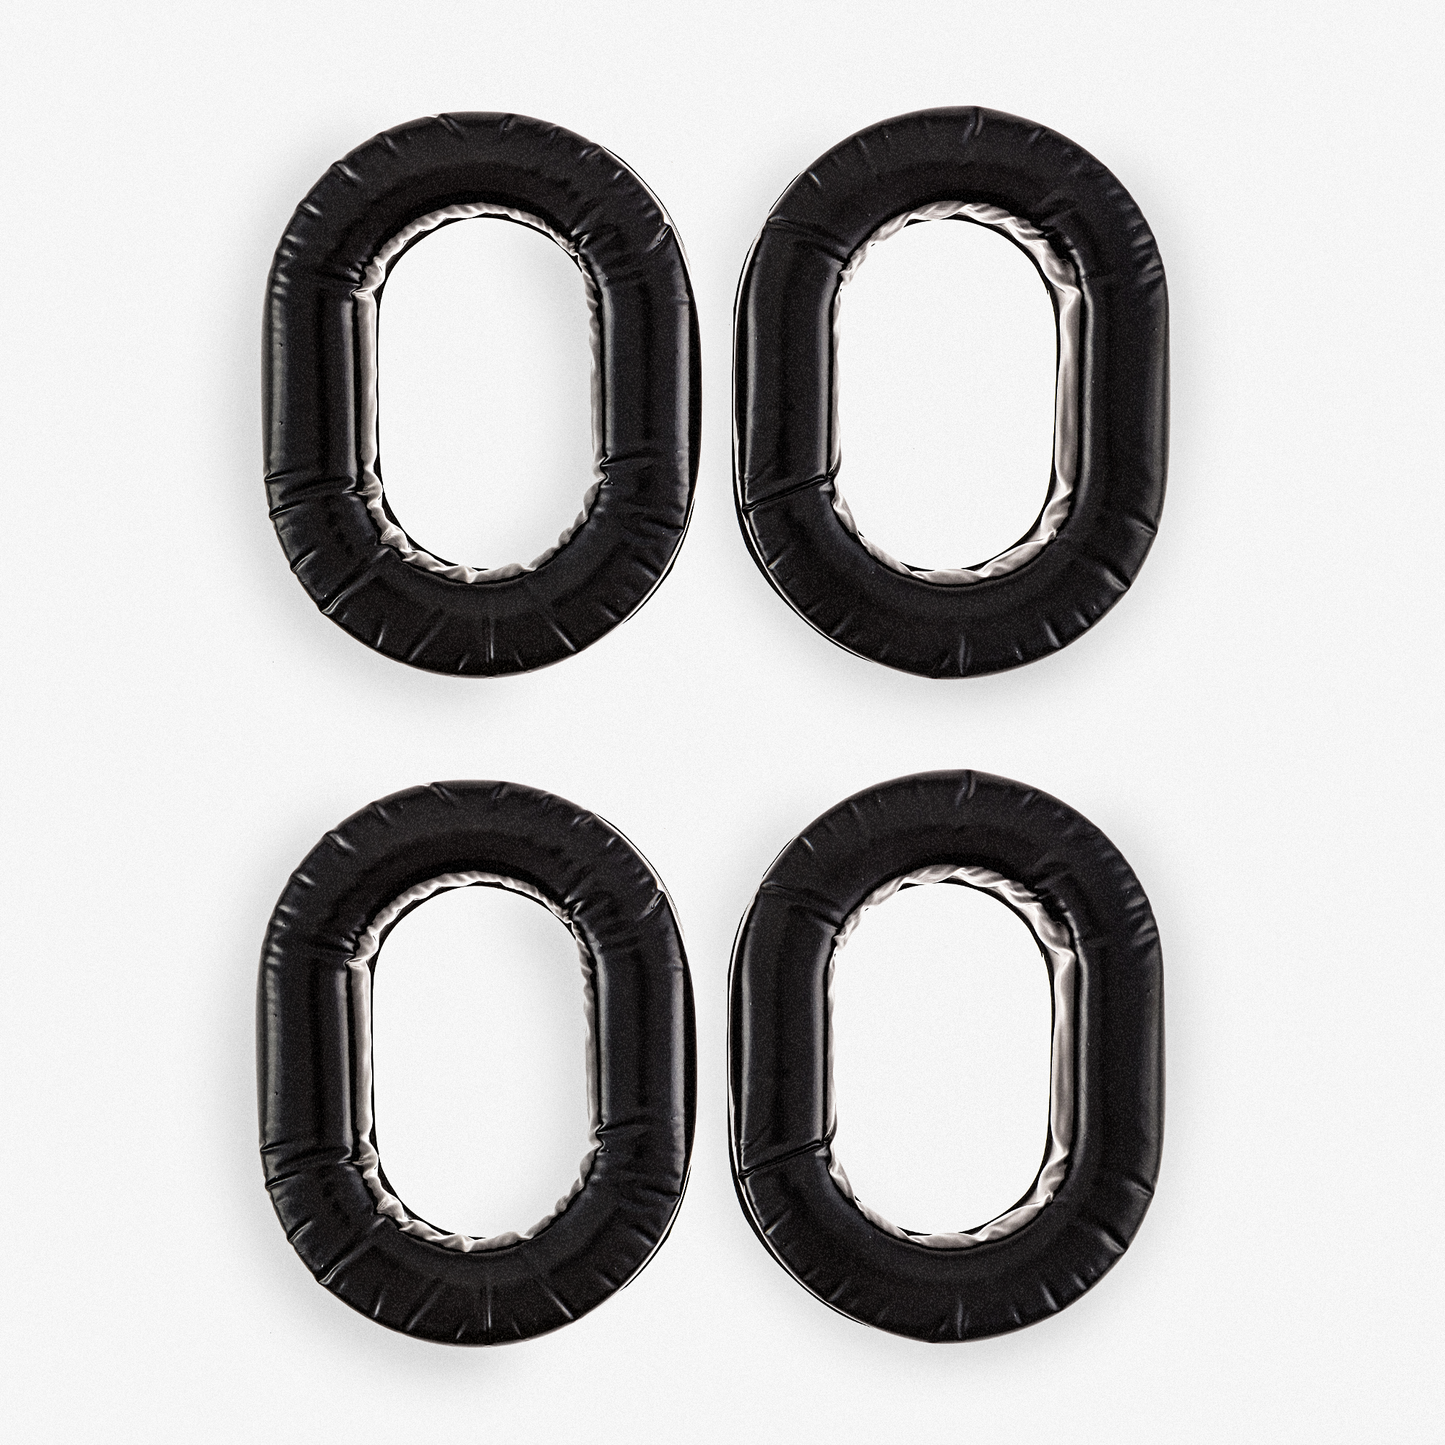 KORE AVIATION - 2 Pack - Ultra Plush Silicone Gel Ear Seal Replacement for Aviation, Racing, Safety Style Headsets (Sold in Pairs)